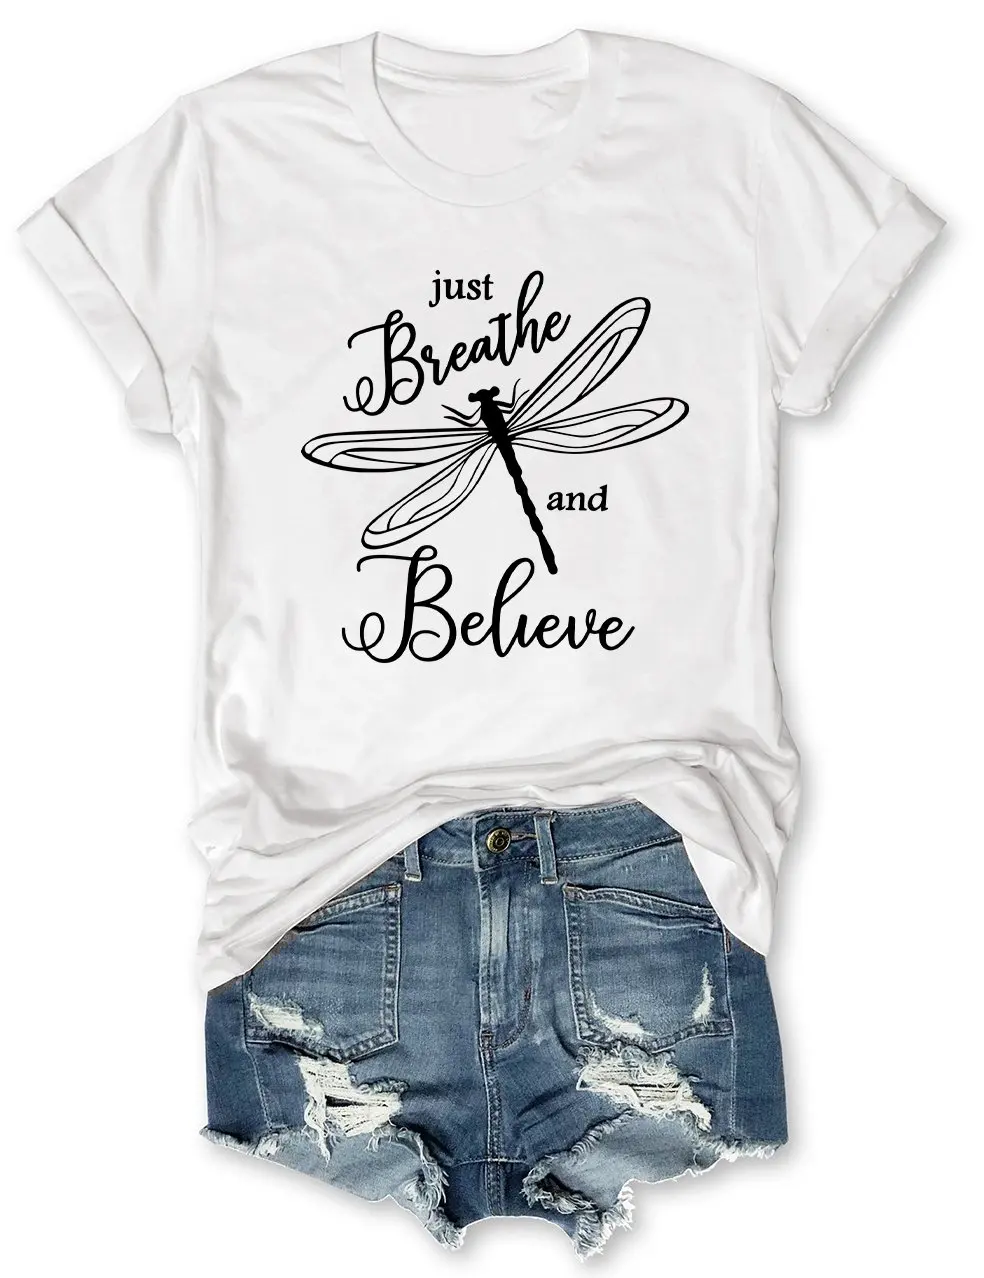 

Teeteety Womens High Quality 100% Cotton Just Breathe and Believe Dragonfly Print O-neck T-shirt